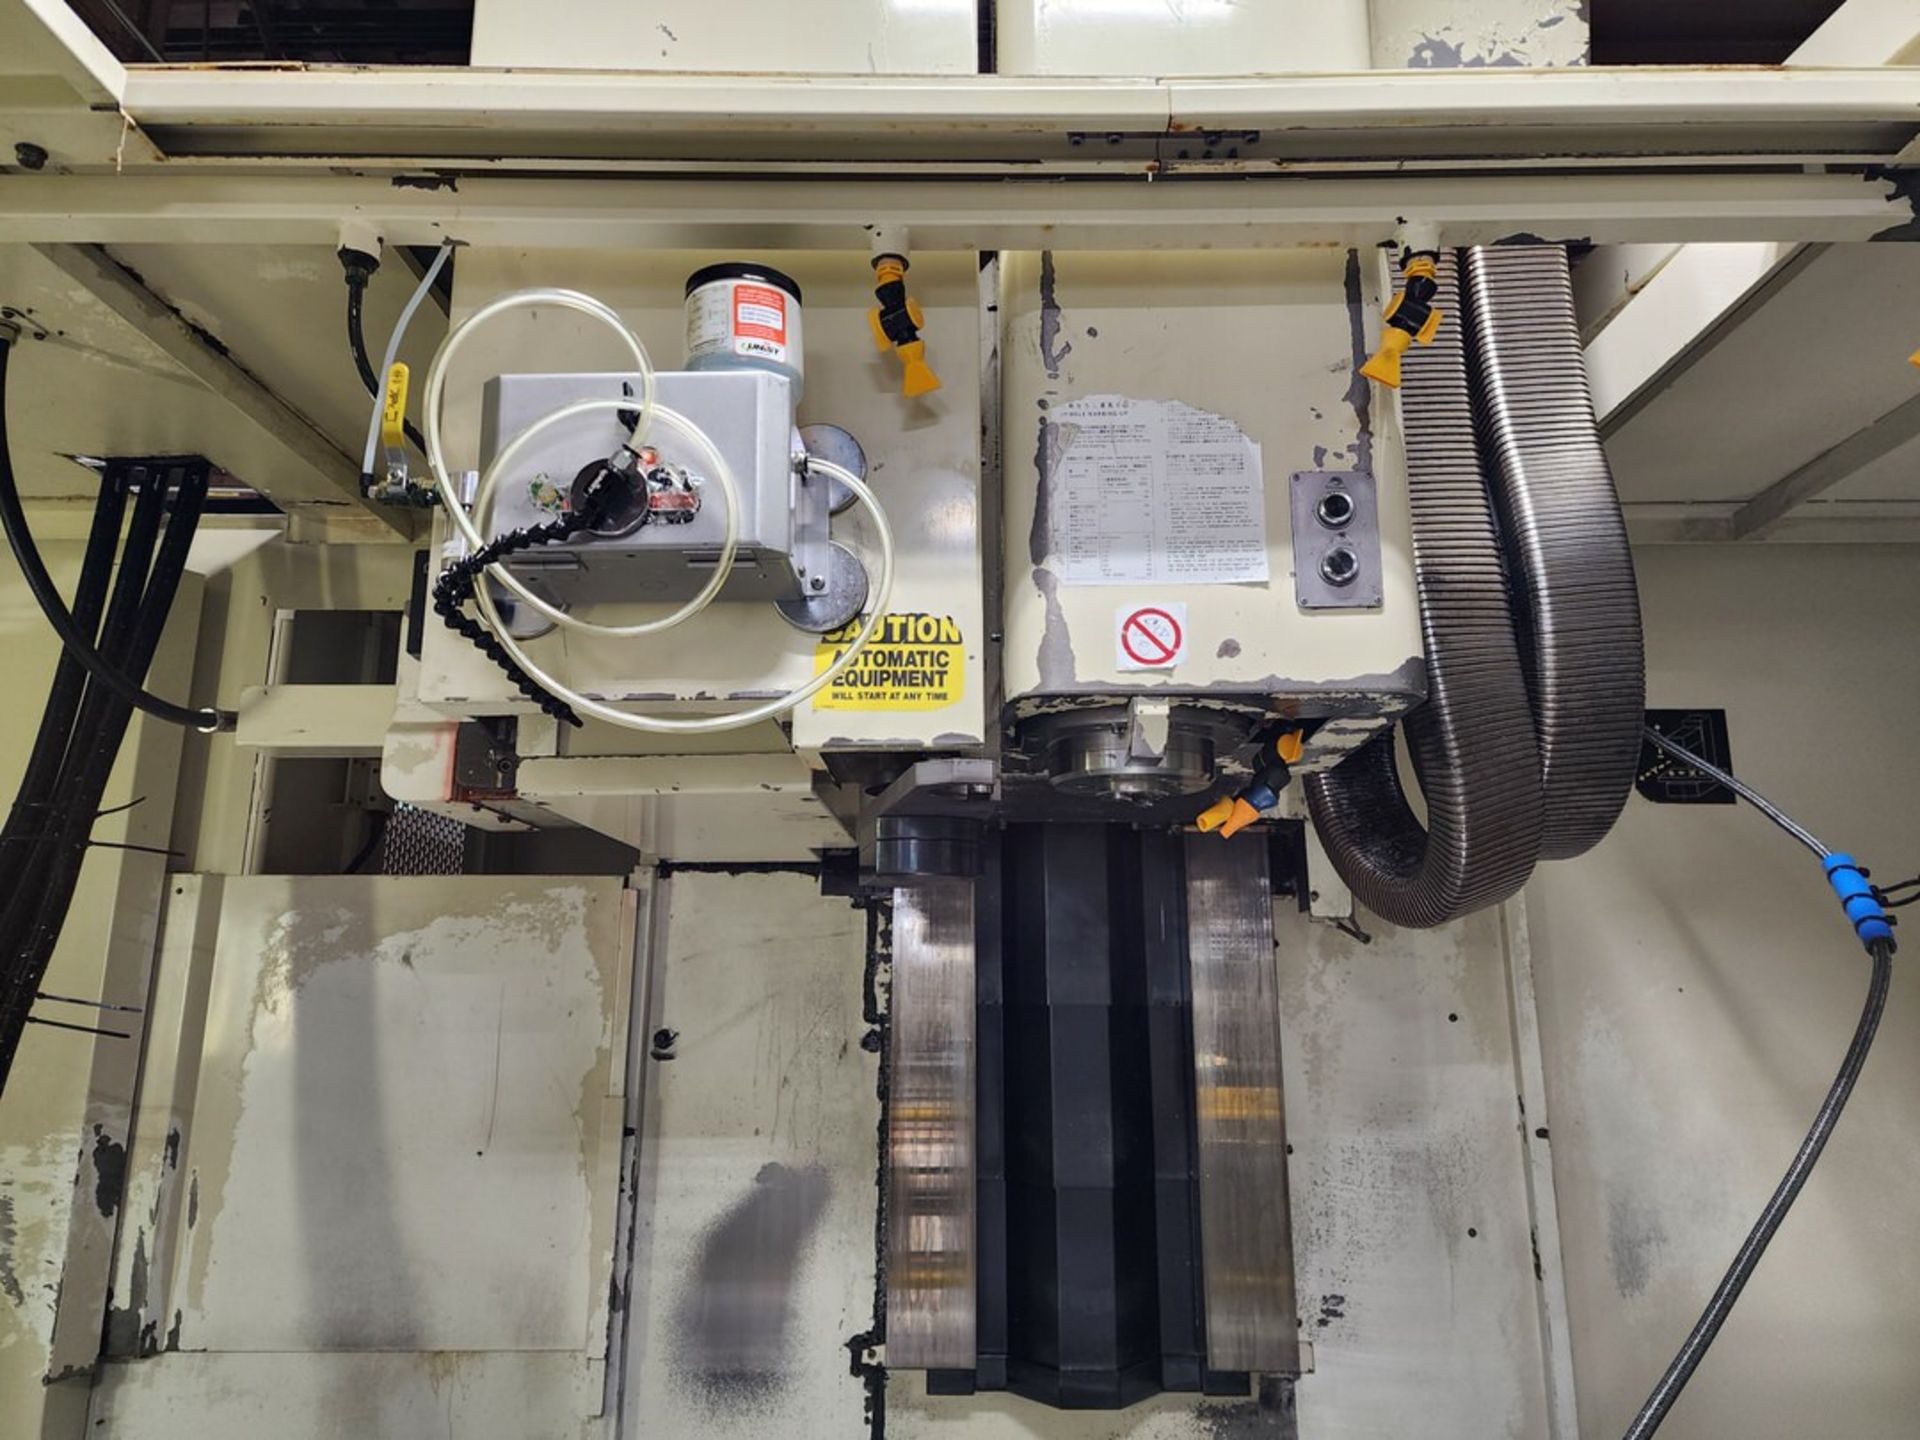 2008 Kitamura 7HiF Vertical Machining Center W/ Fanuc Series 16i-MB; 30,000 Spindle Speed; - Image 7 of 23